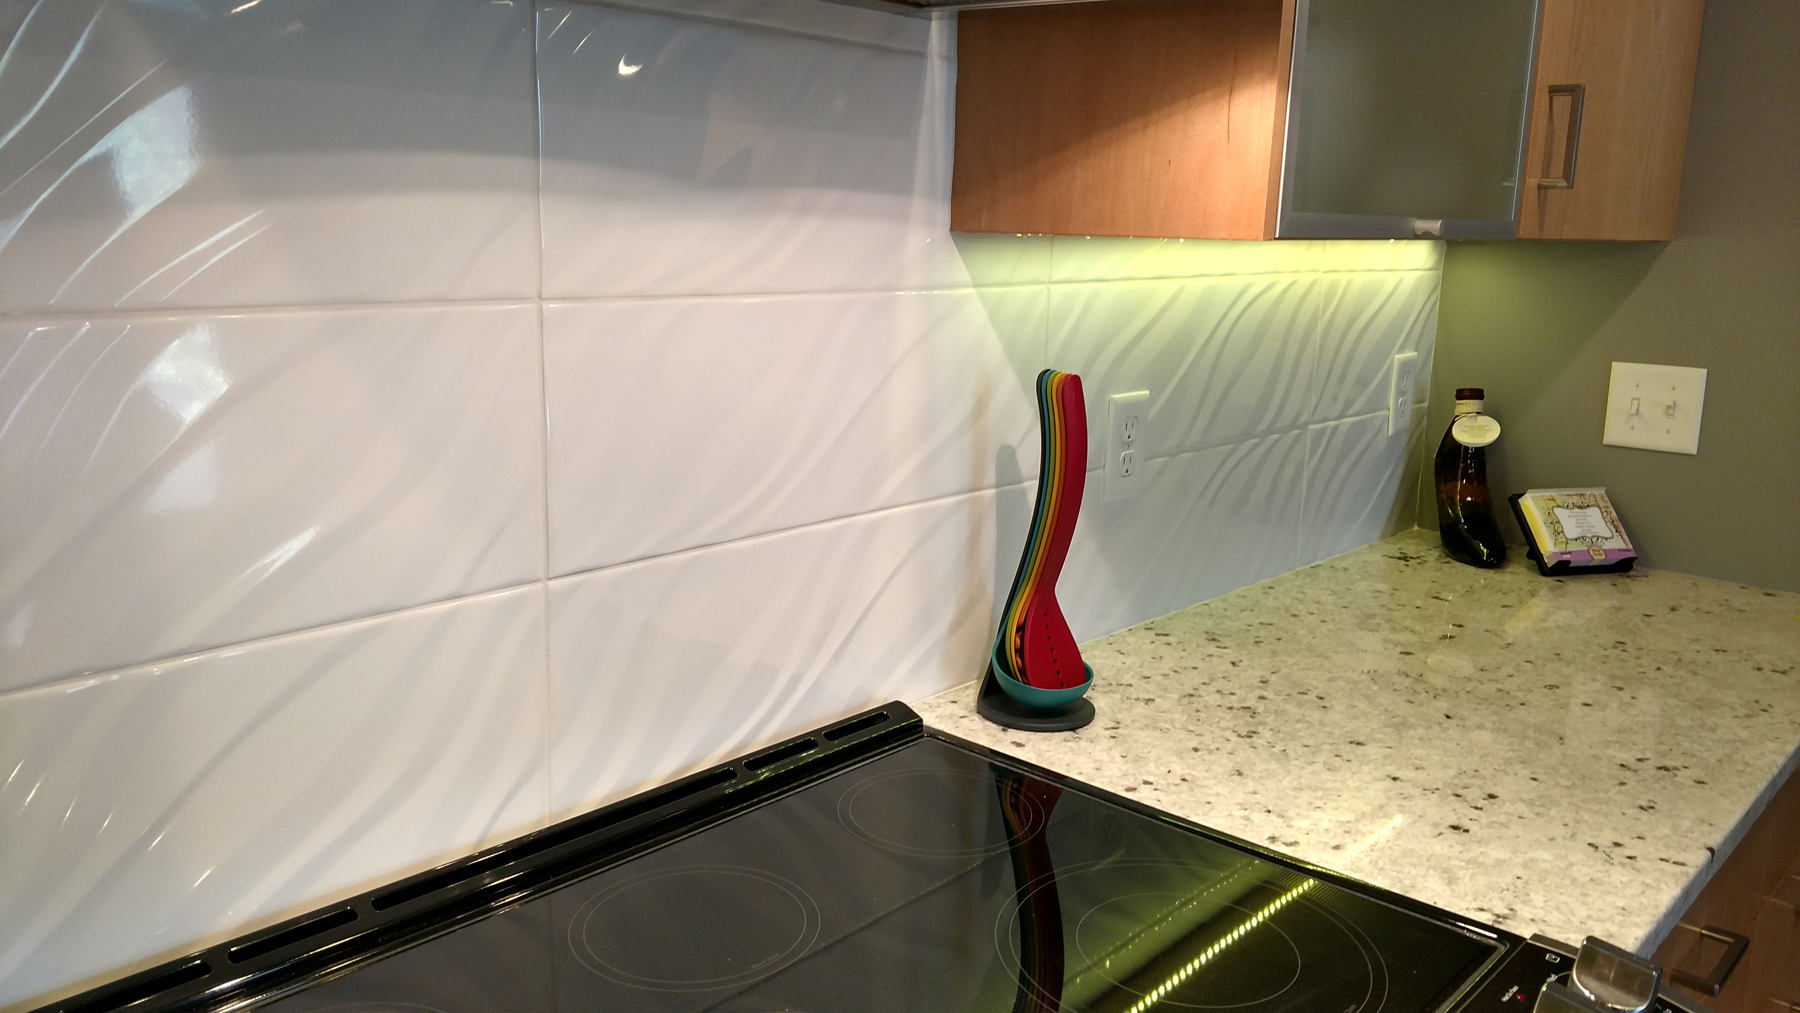 Crazy Wavy backsplash tiles- Yes there is a pattern